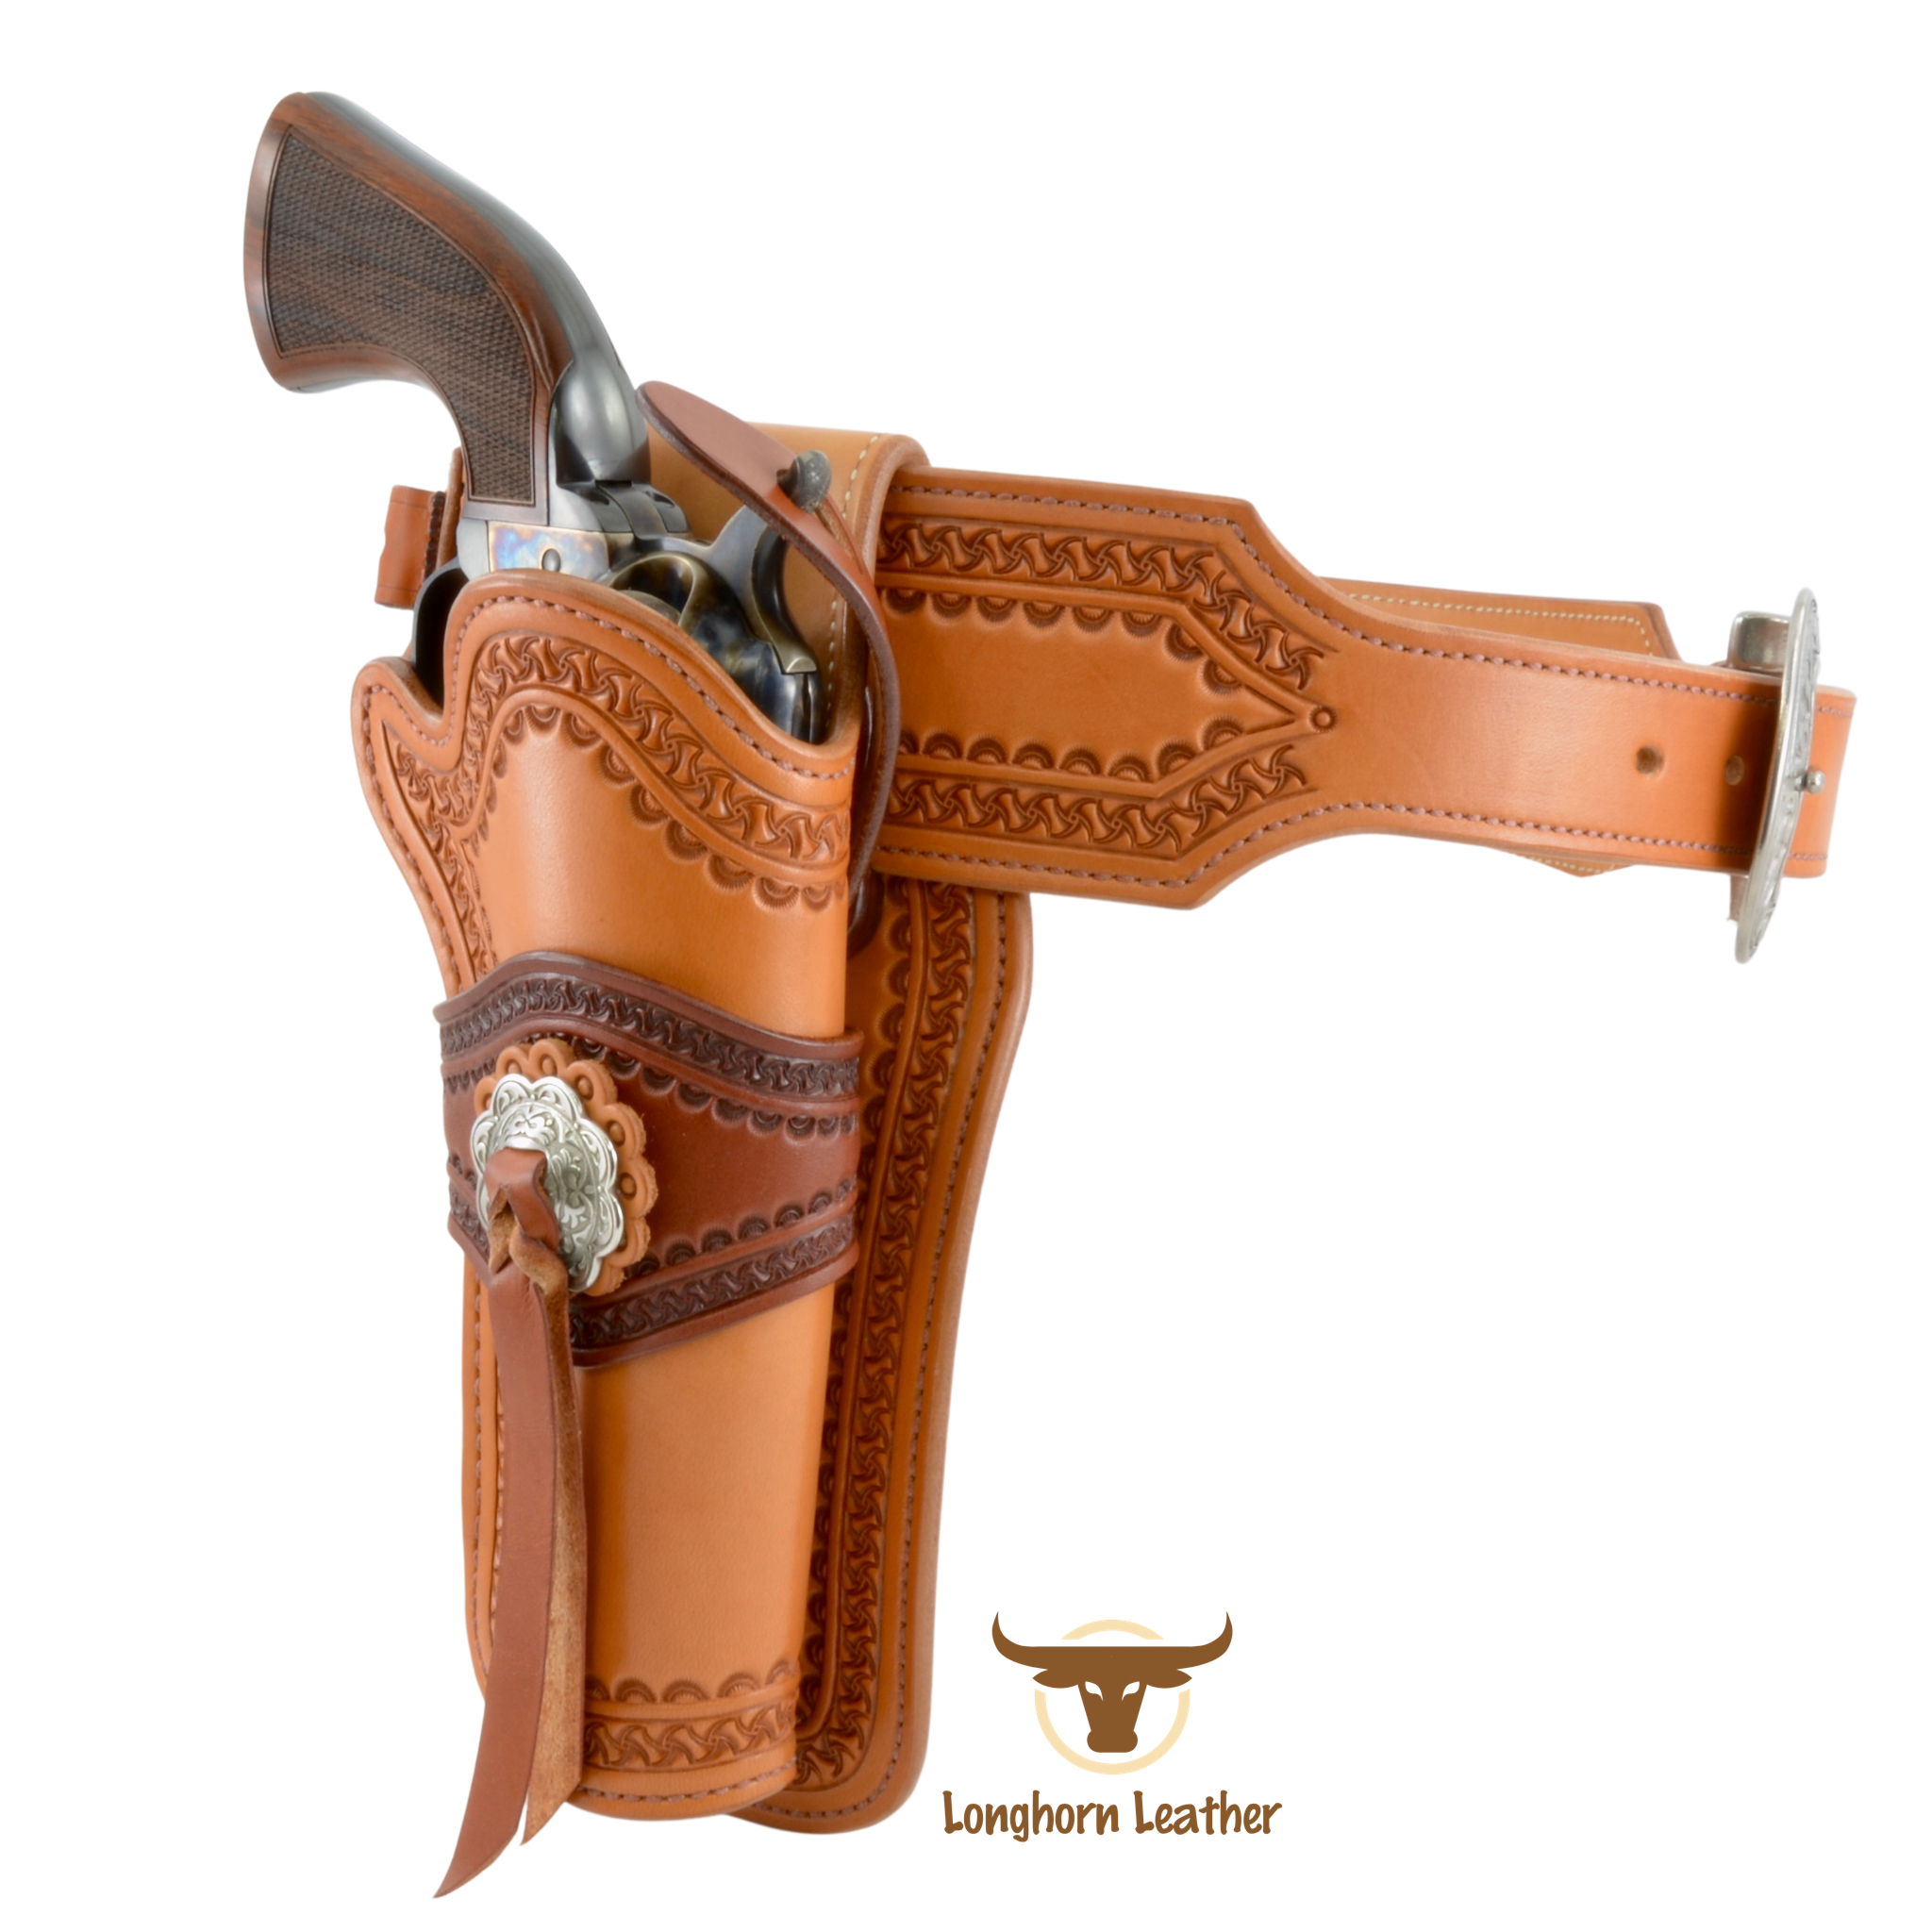 Custom leather single action holster and cartridge belt featuring the "Kingman" design.  Individually handcrafted at Longhorn Leather AZ.